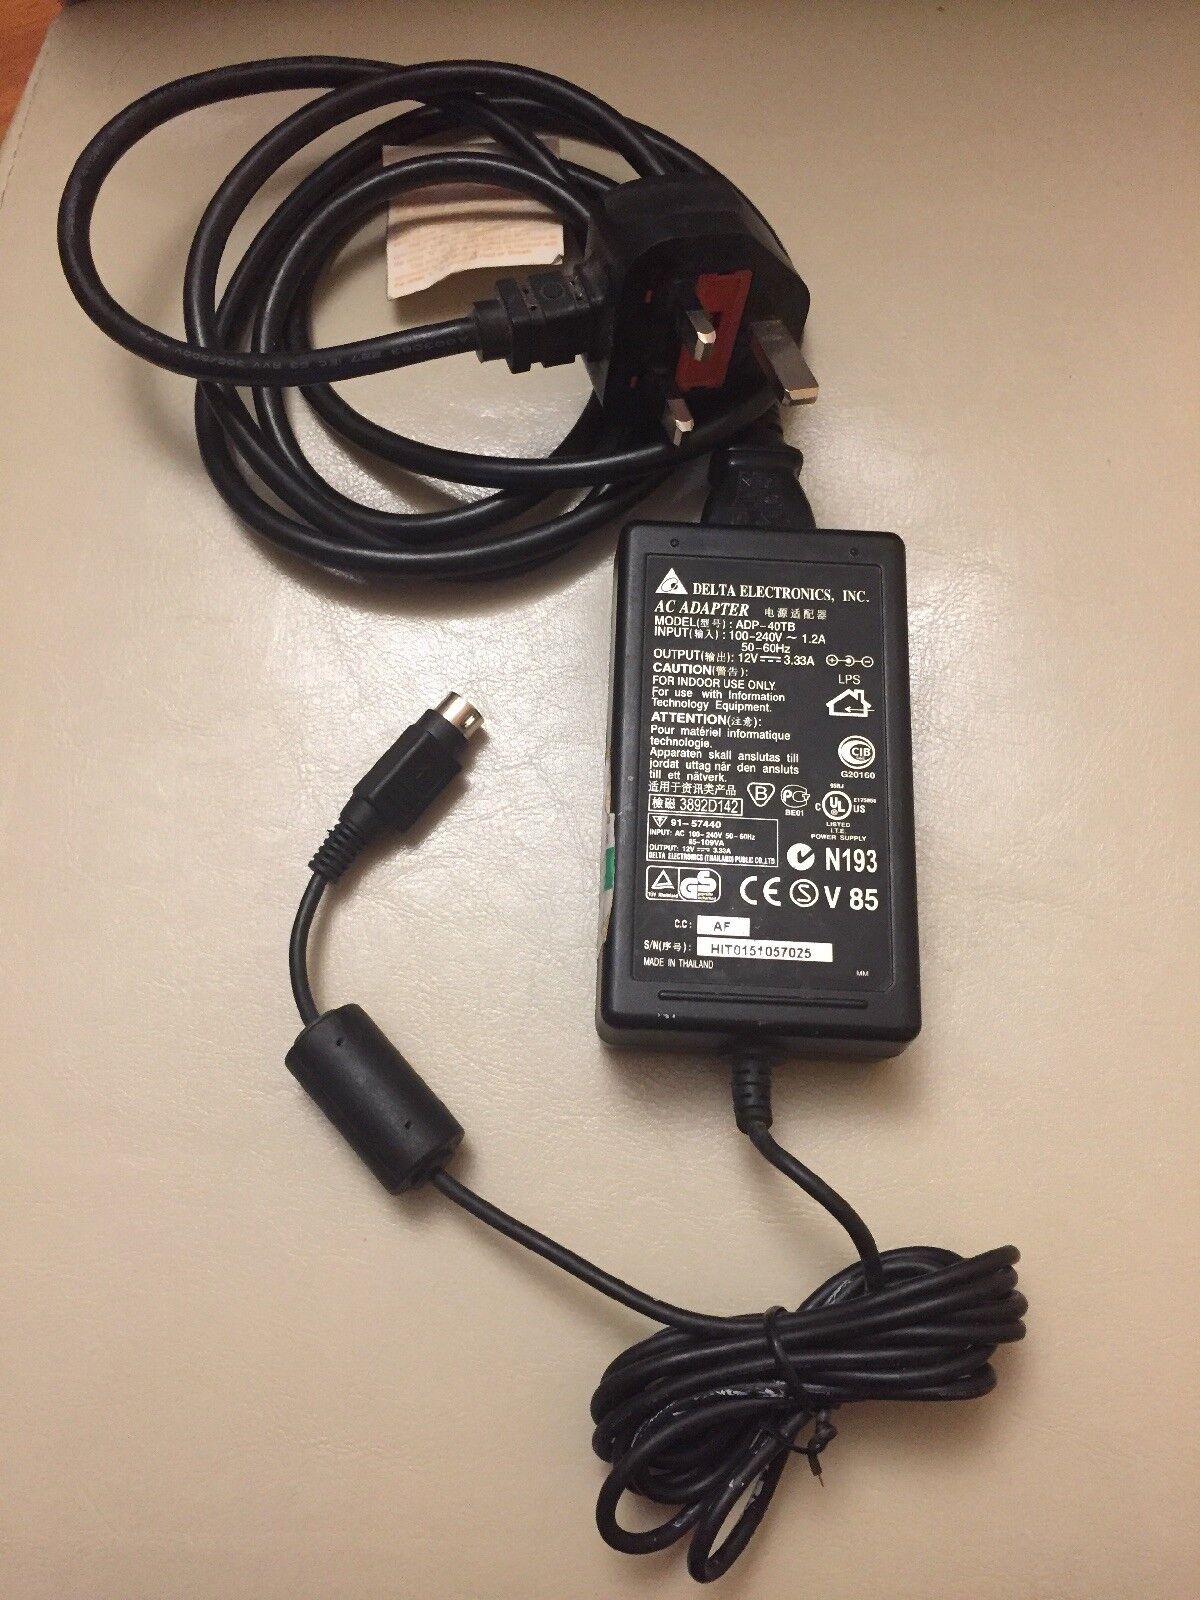 *Brand NEW*DELTA ELECTRONICS, INC. ADP-40TB 12V 3.33A AC ADAPTER POWER SUPPLY